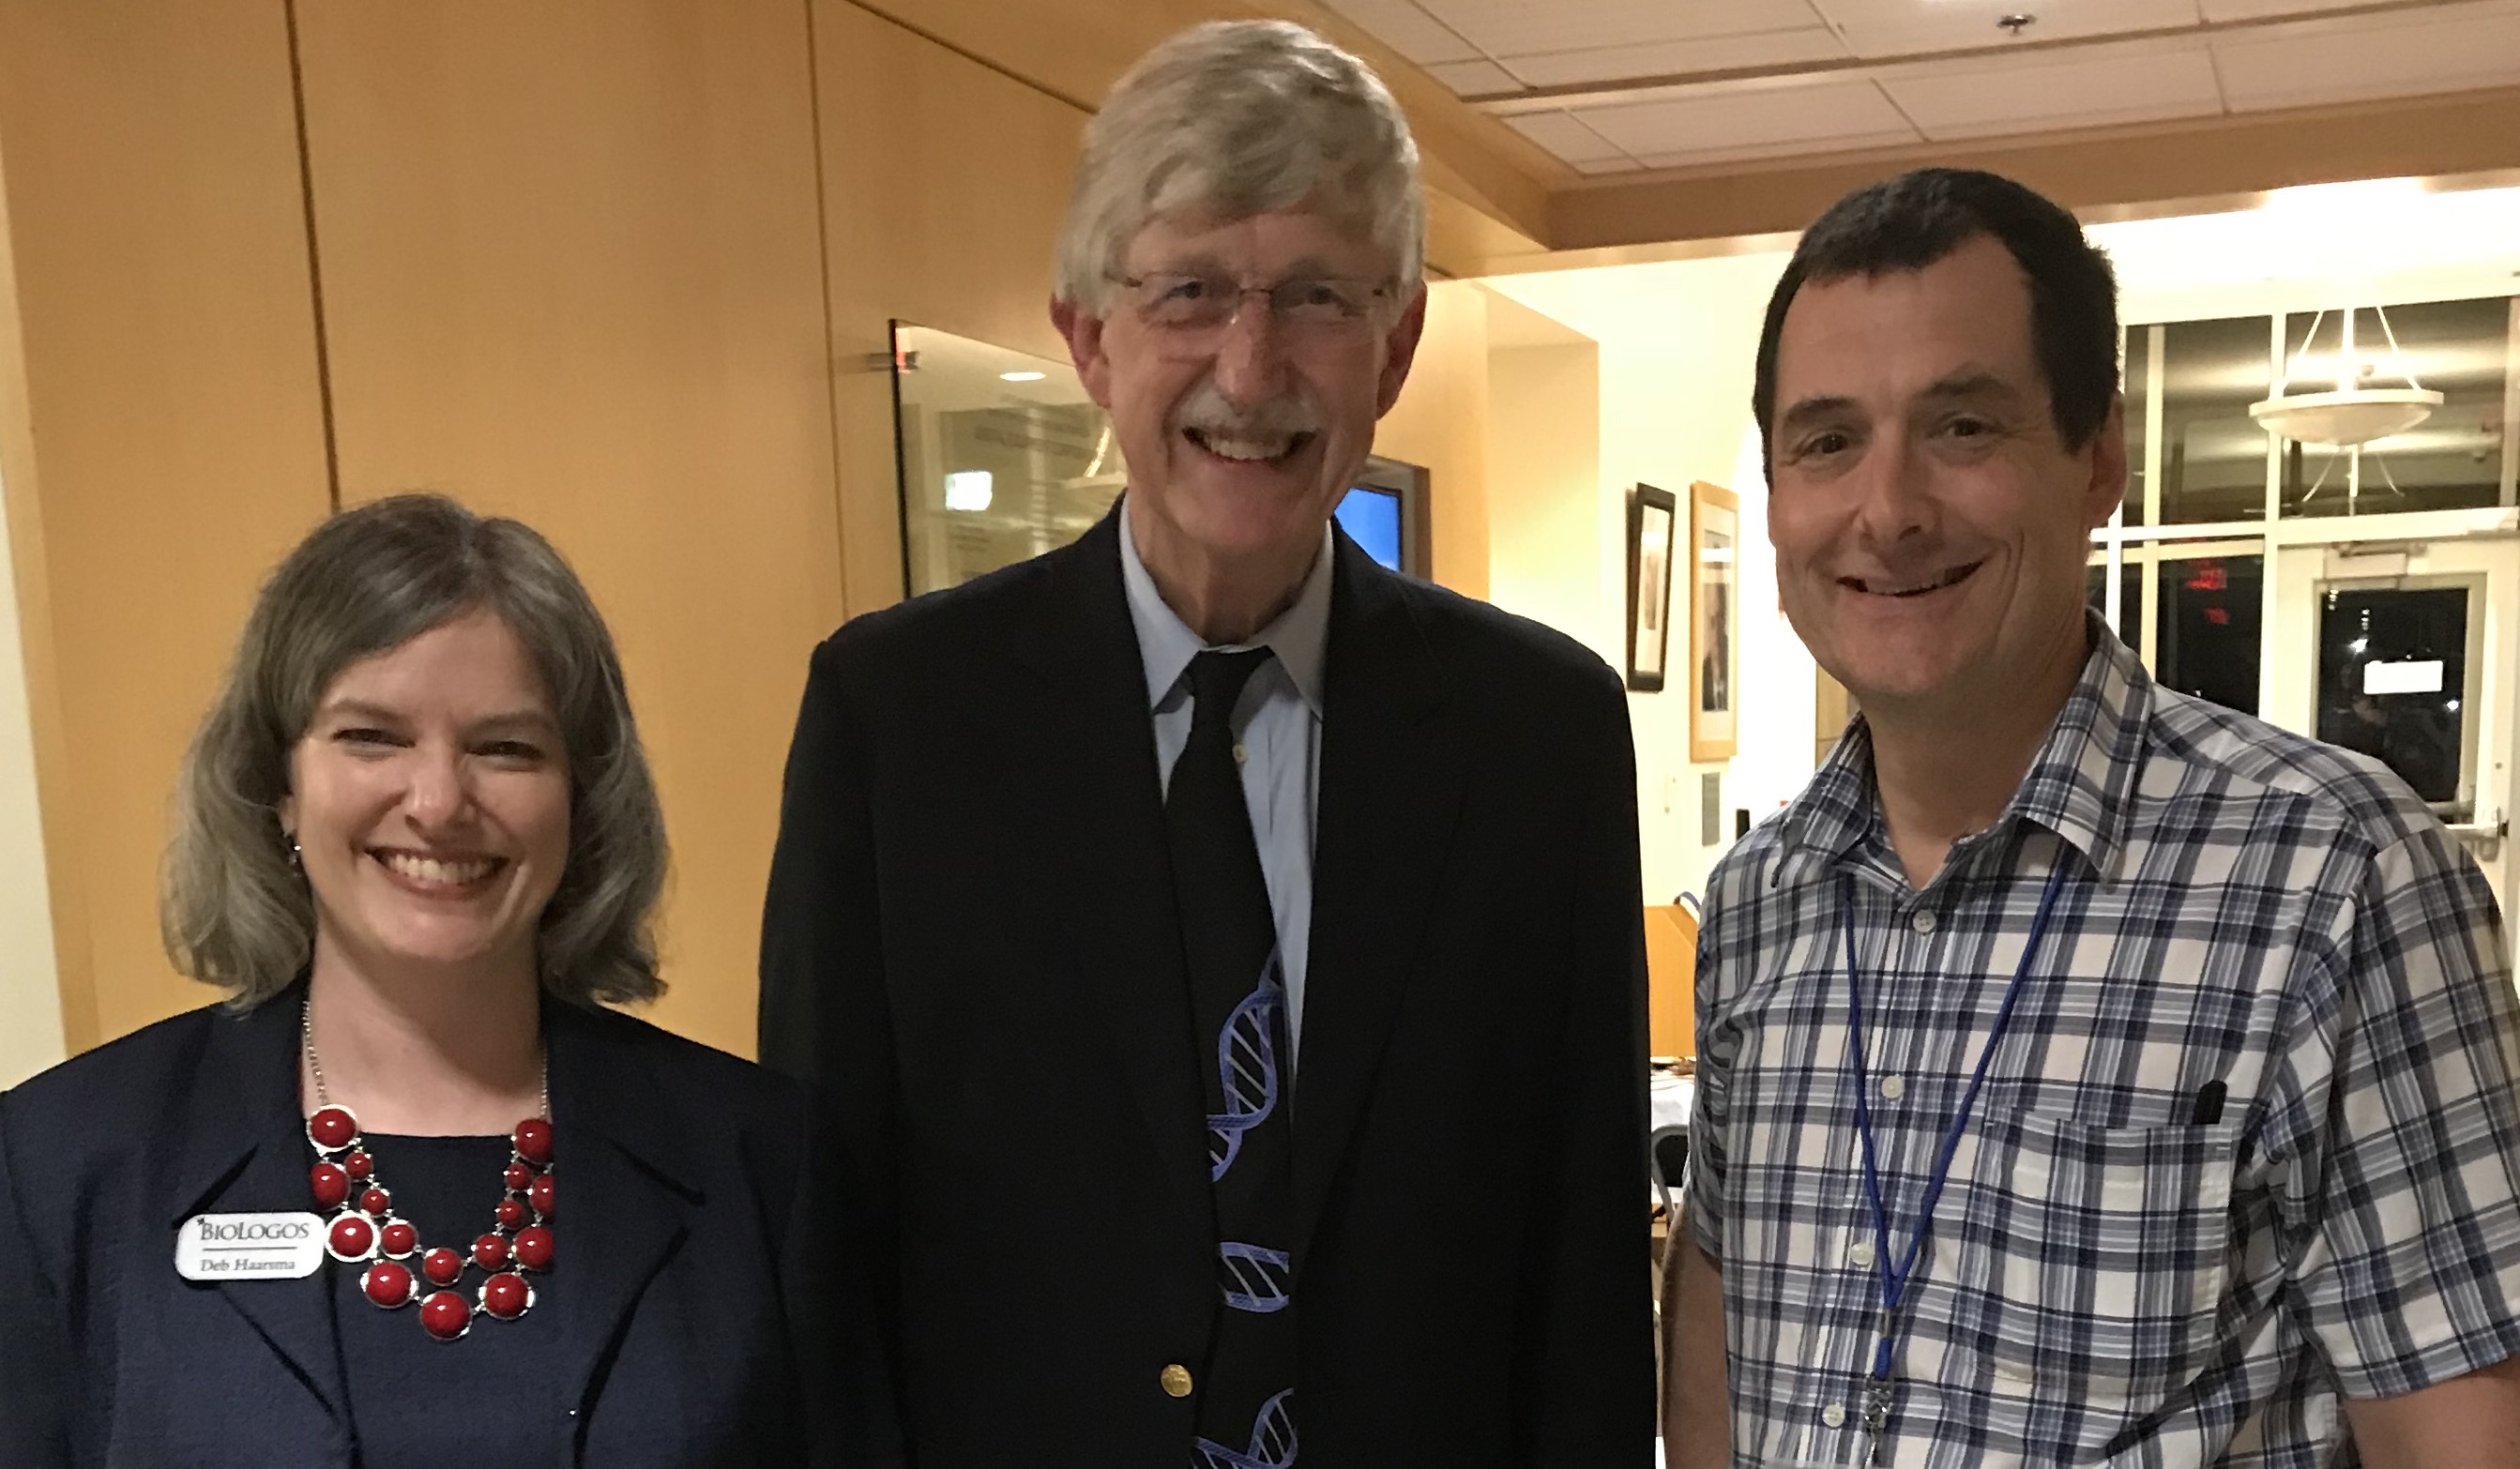 Chris Mulherin with Francis Collins and Deb Haarsma, President of BioLogos.